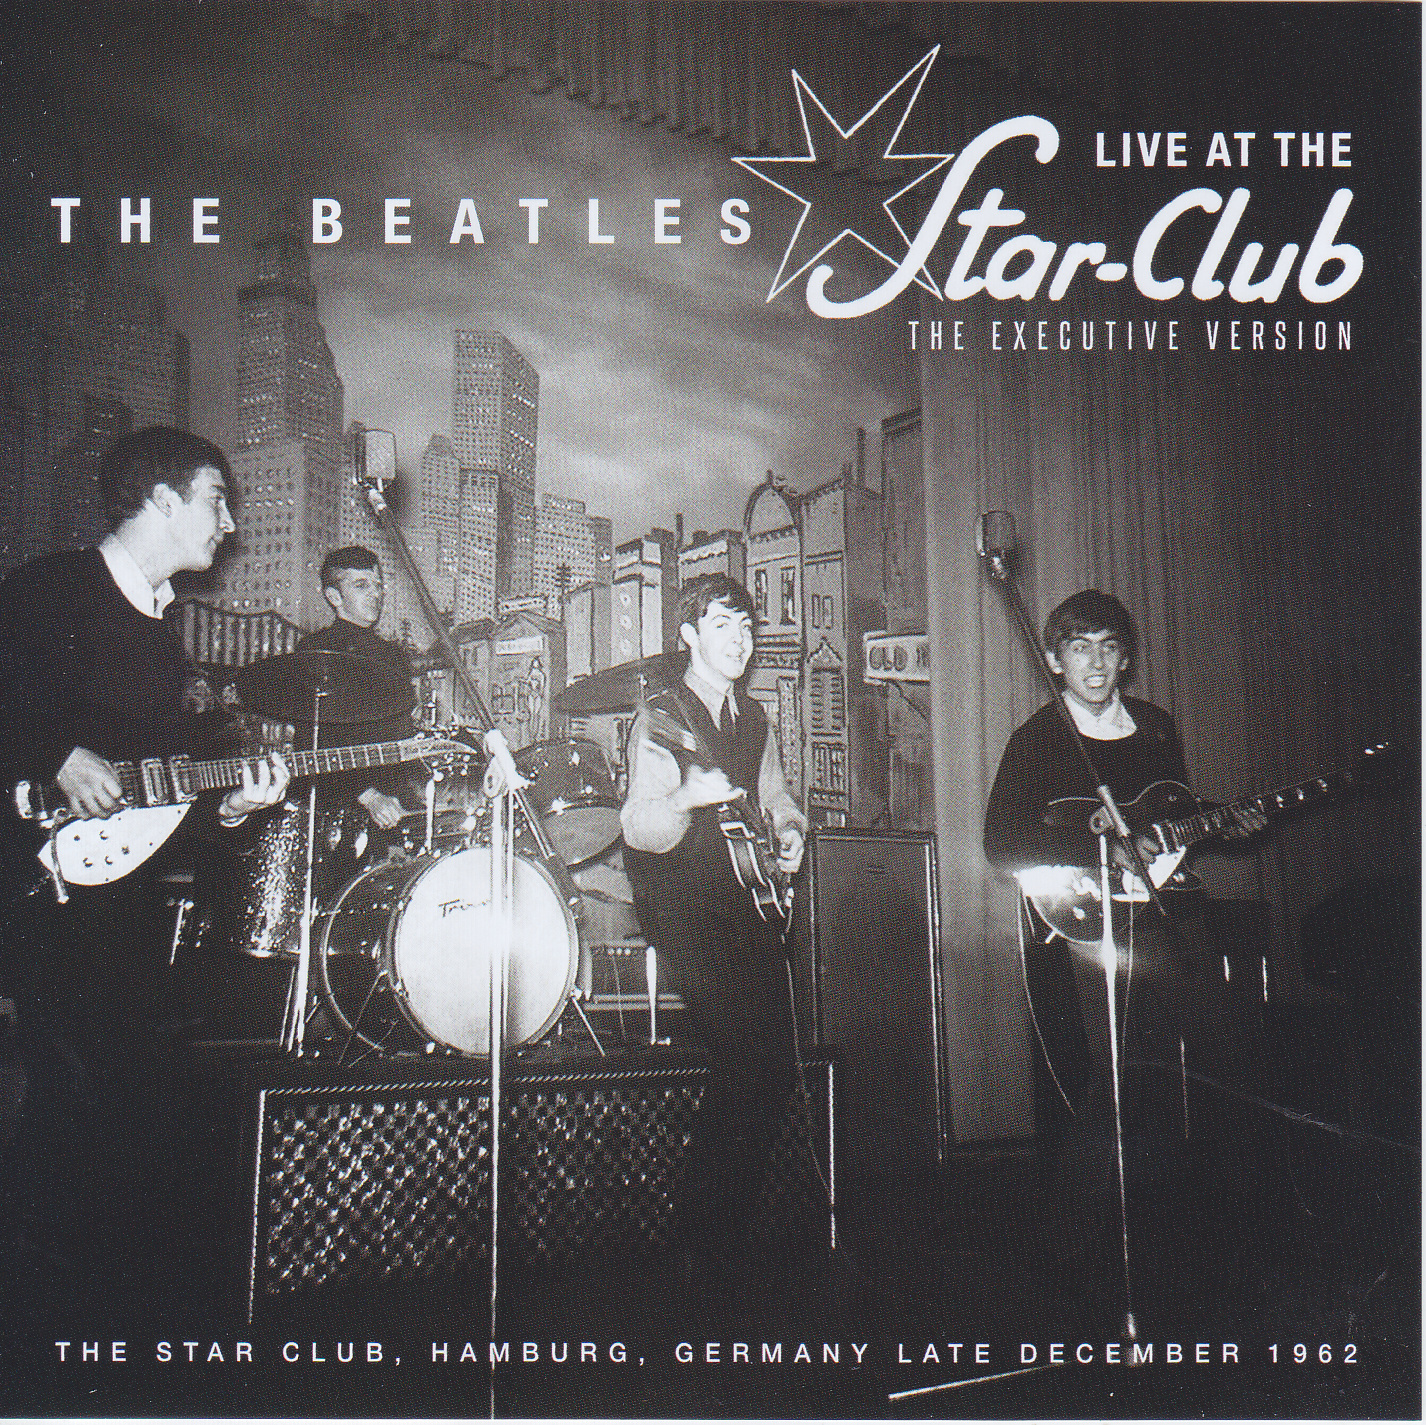 THE STAR CLUB ザ・スタークラブCOMPLETE DVD BOX - ミュージック